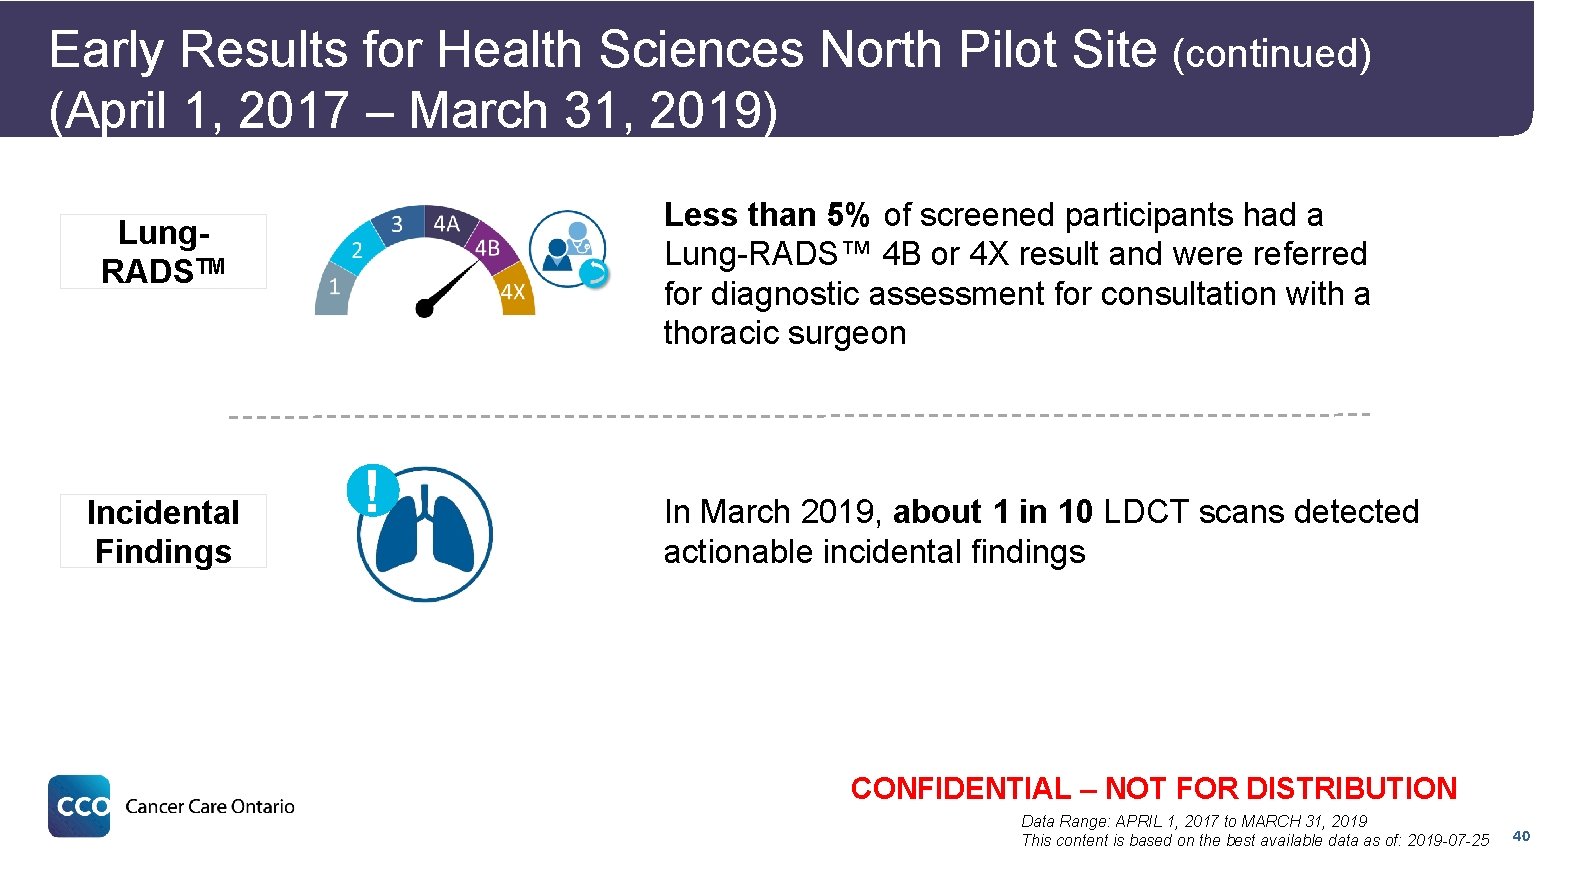 Early Results for Health Sciences North Pilot Site (continued) (April 1, 2017 – March